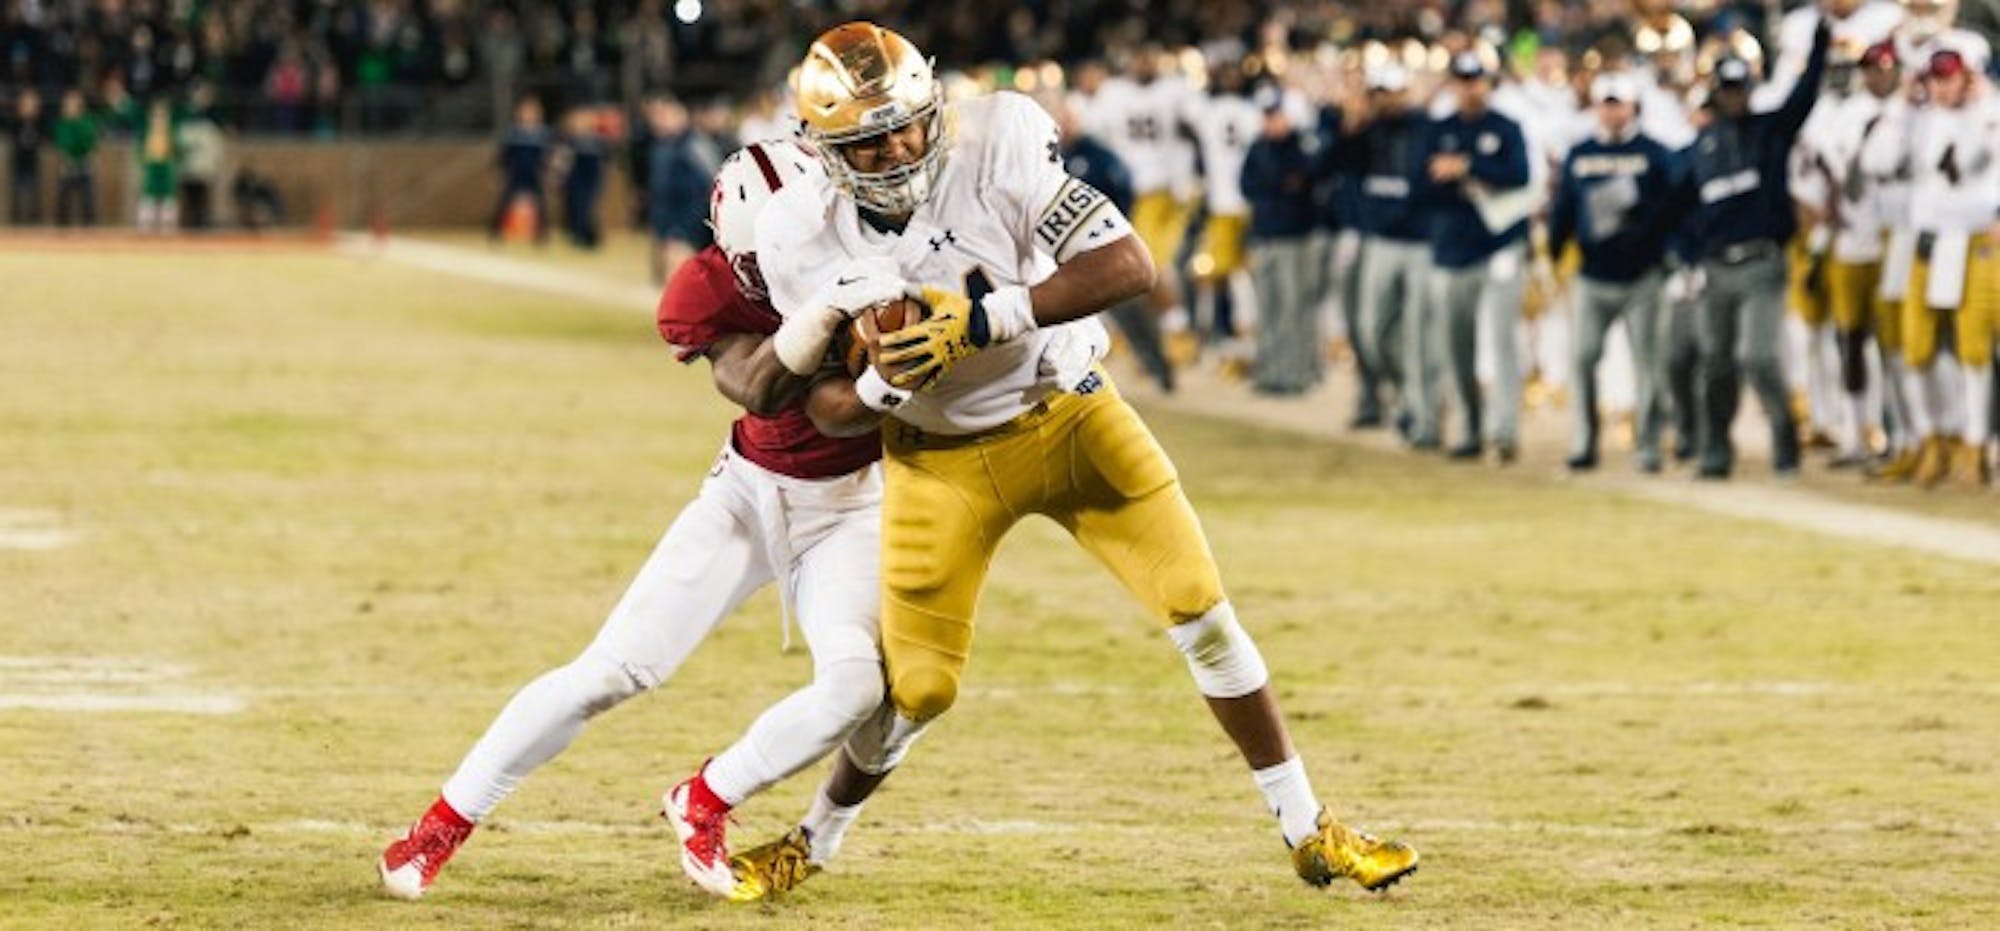 Irish sophomore quarterback DeShone Kizer scores the game-tying touchdown with 30 seconds left Saturday at Stanford Stadium. Notre Dame went ahead on the extra point but lost in regulation, 38-36.